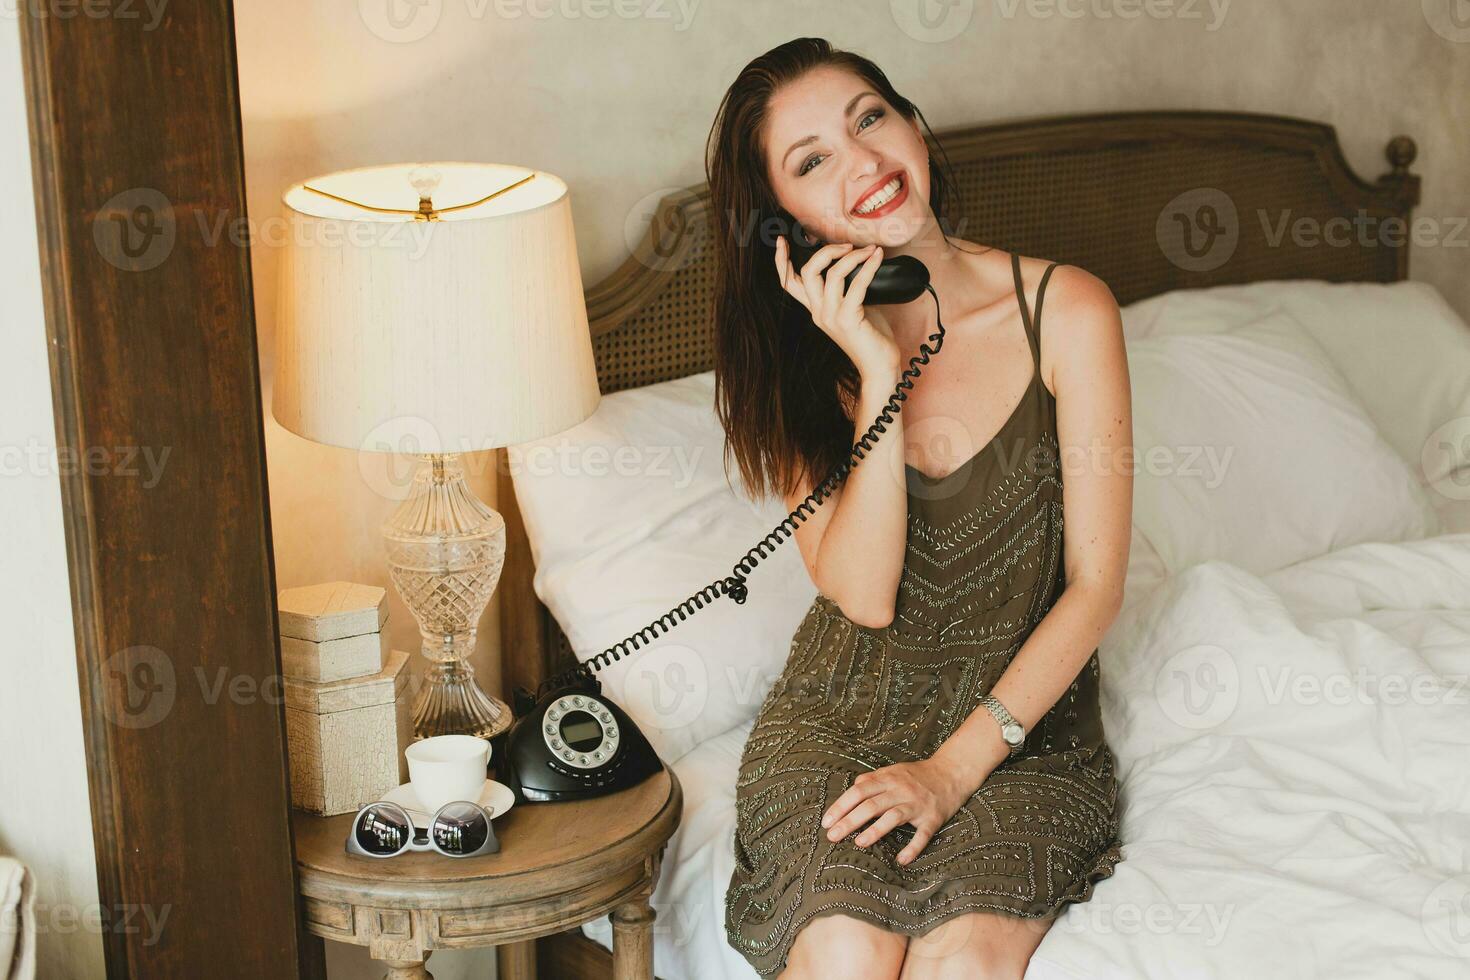 young beautiful woman sitting on bed in hotel room photo